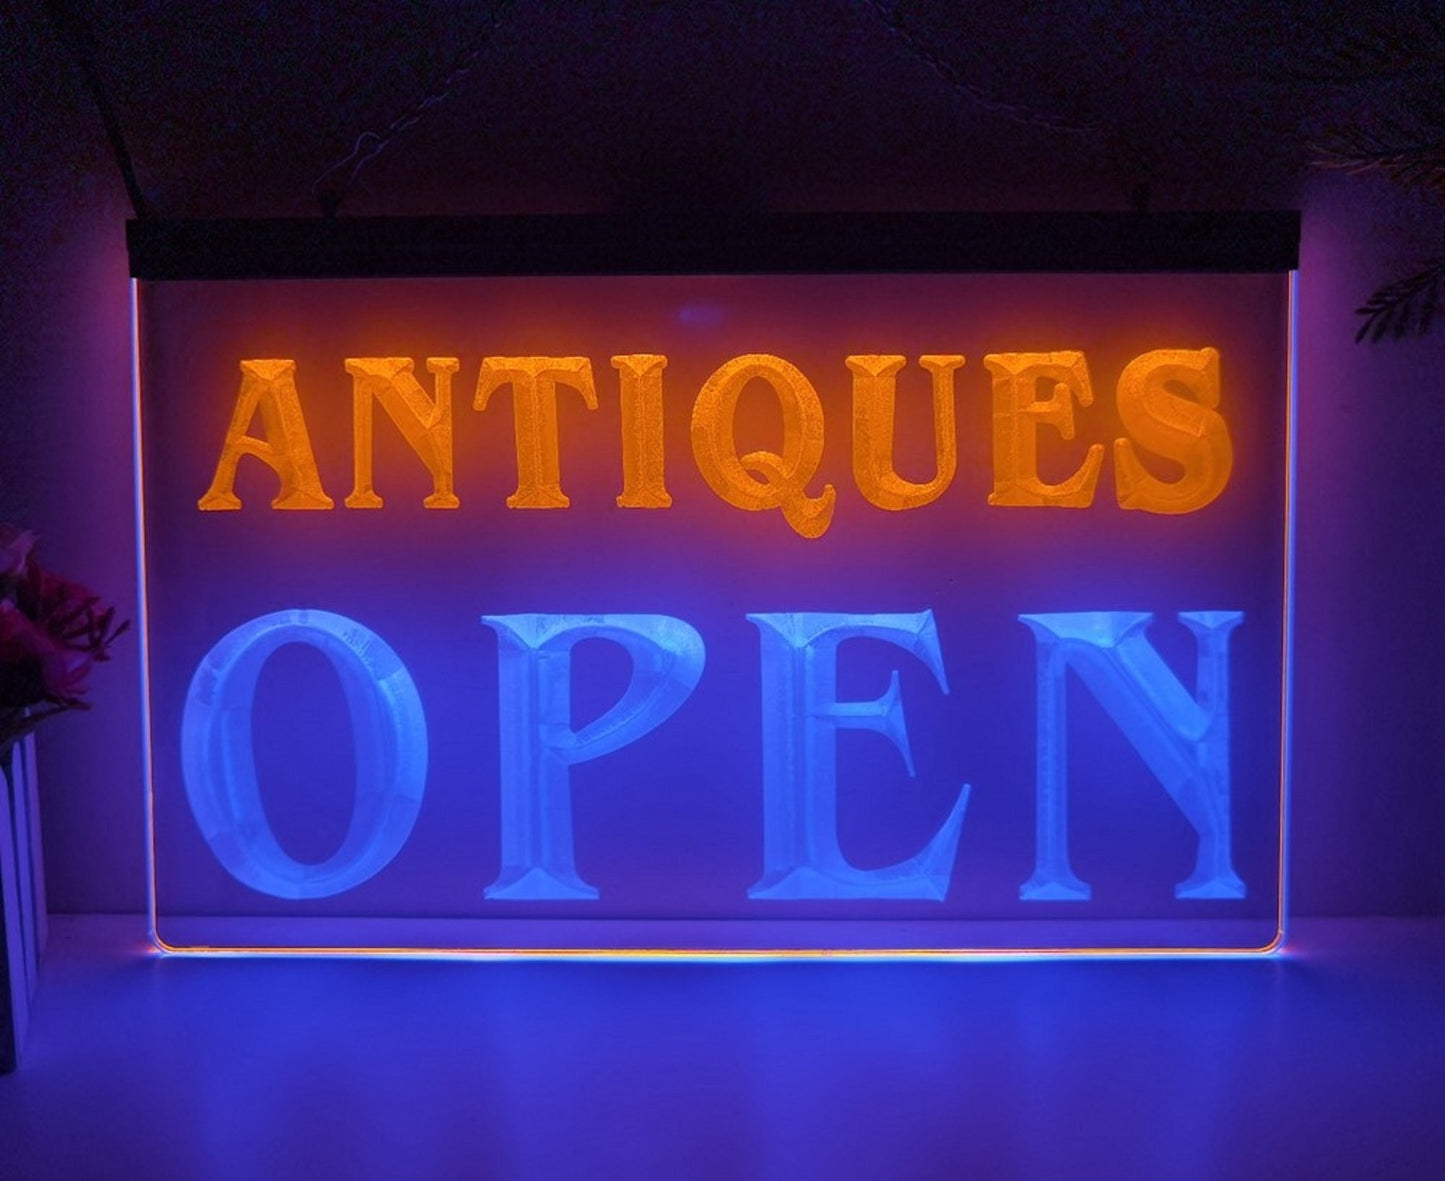 Neon Sign Dual Color Antiques Open Wall Desktop Decor Free Shipping